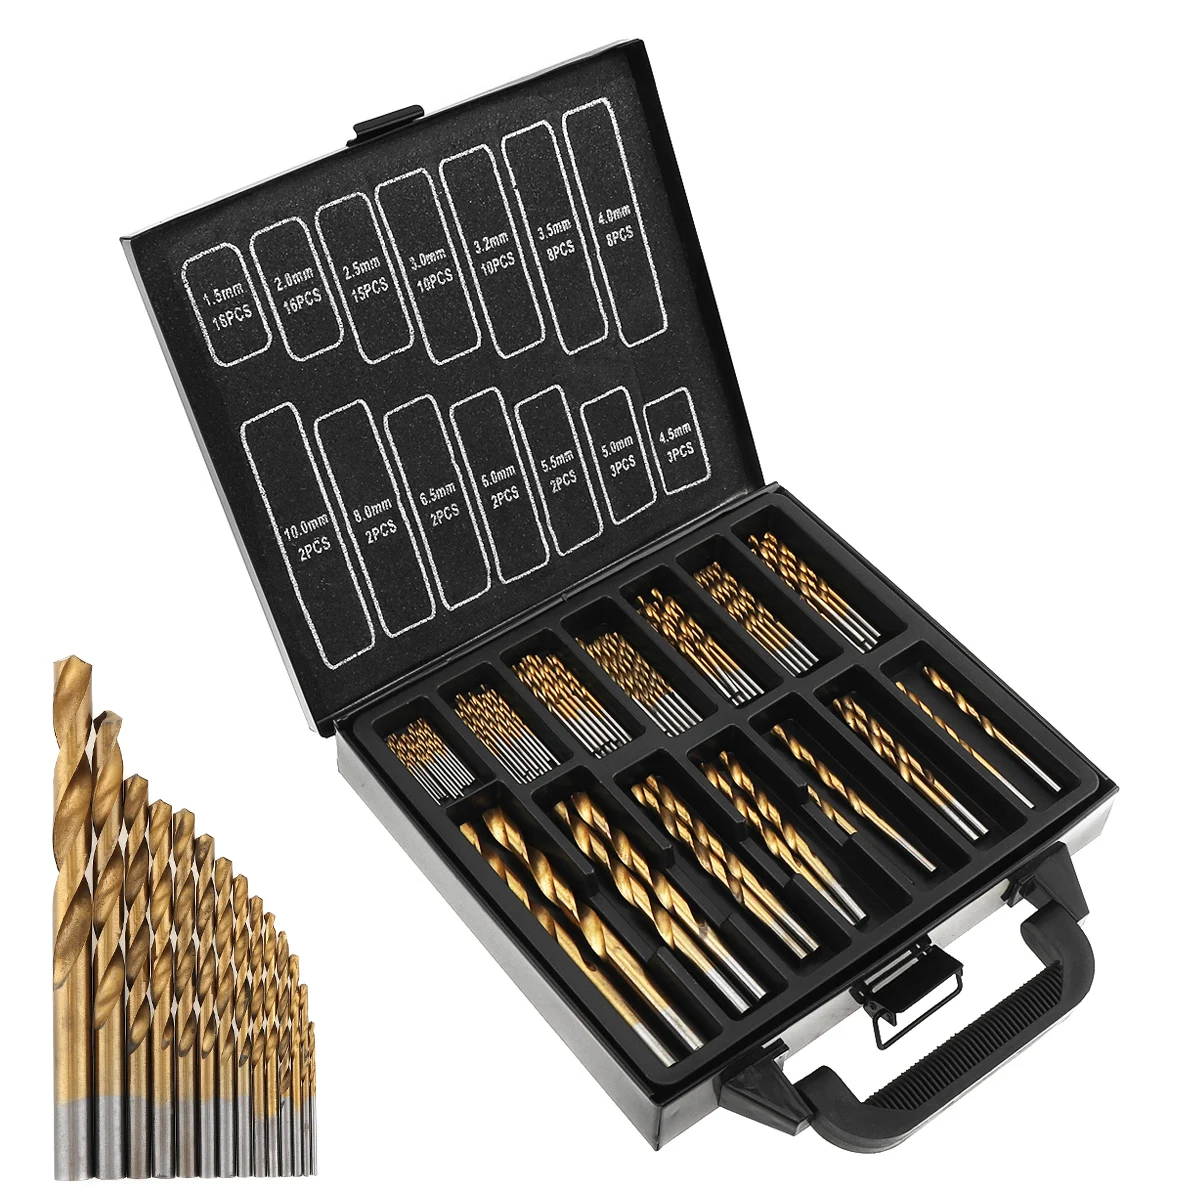 

99pcs Titanium Plate HSS Twist Drill Bits Coated Set 1.5MM 10MM Stainless Steel HSS Drilling Metal with Iron Box for Power Tool